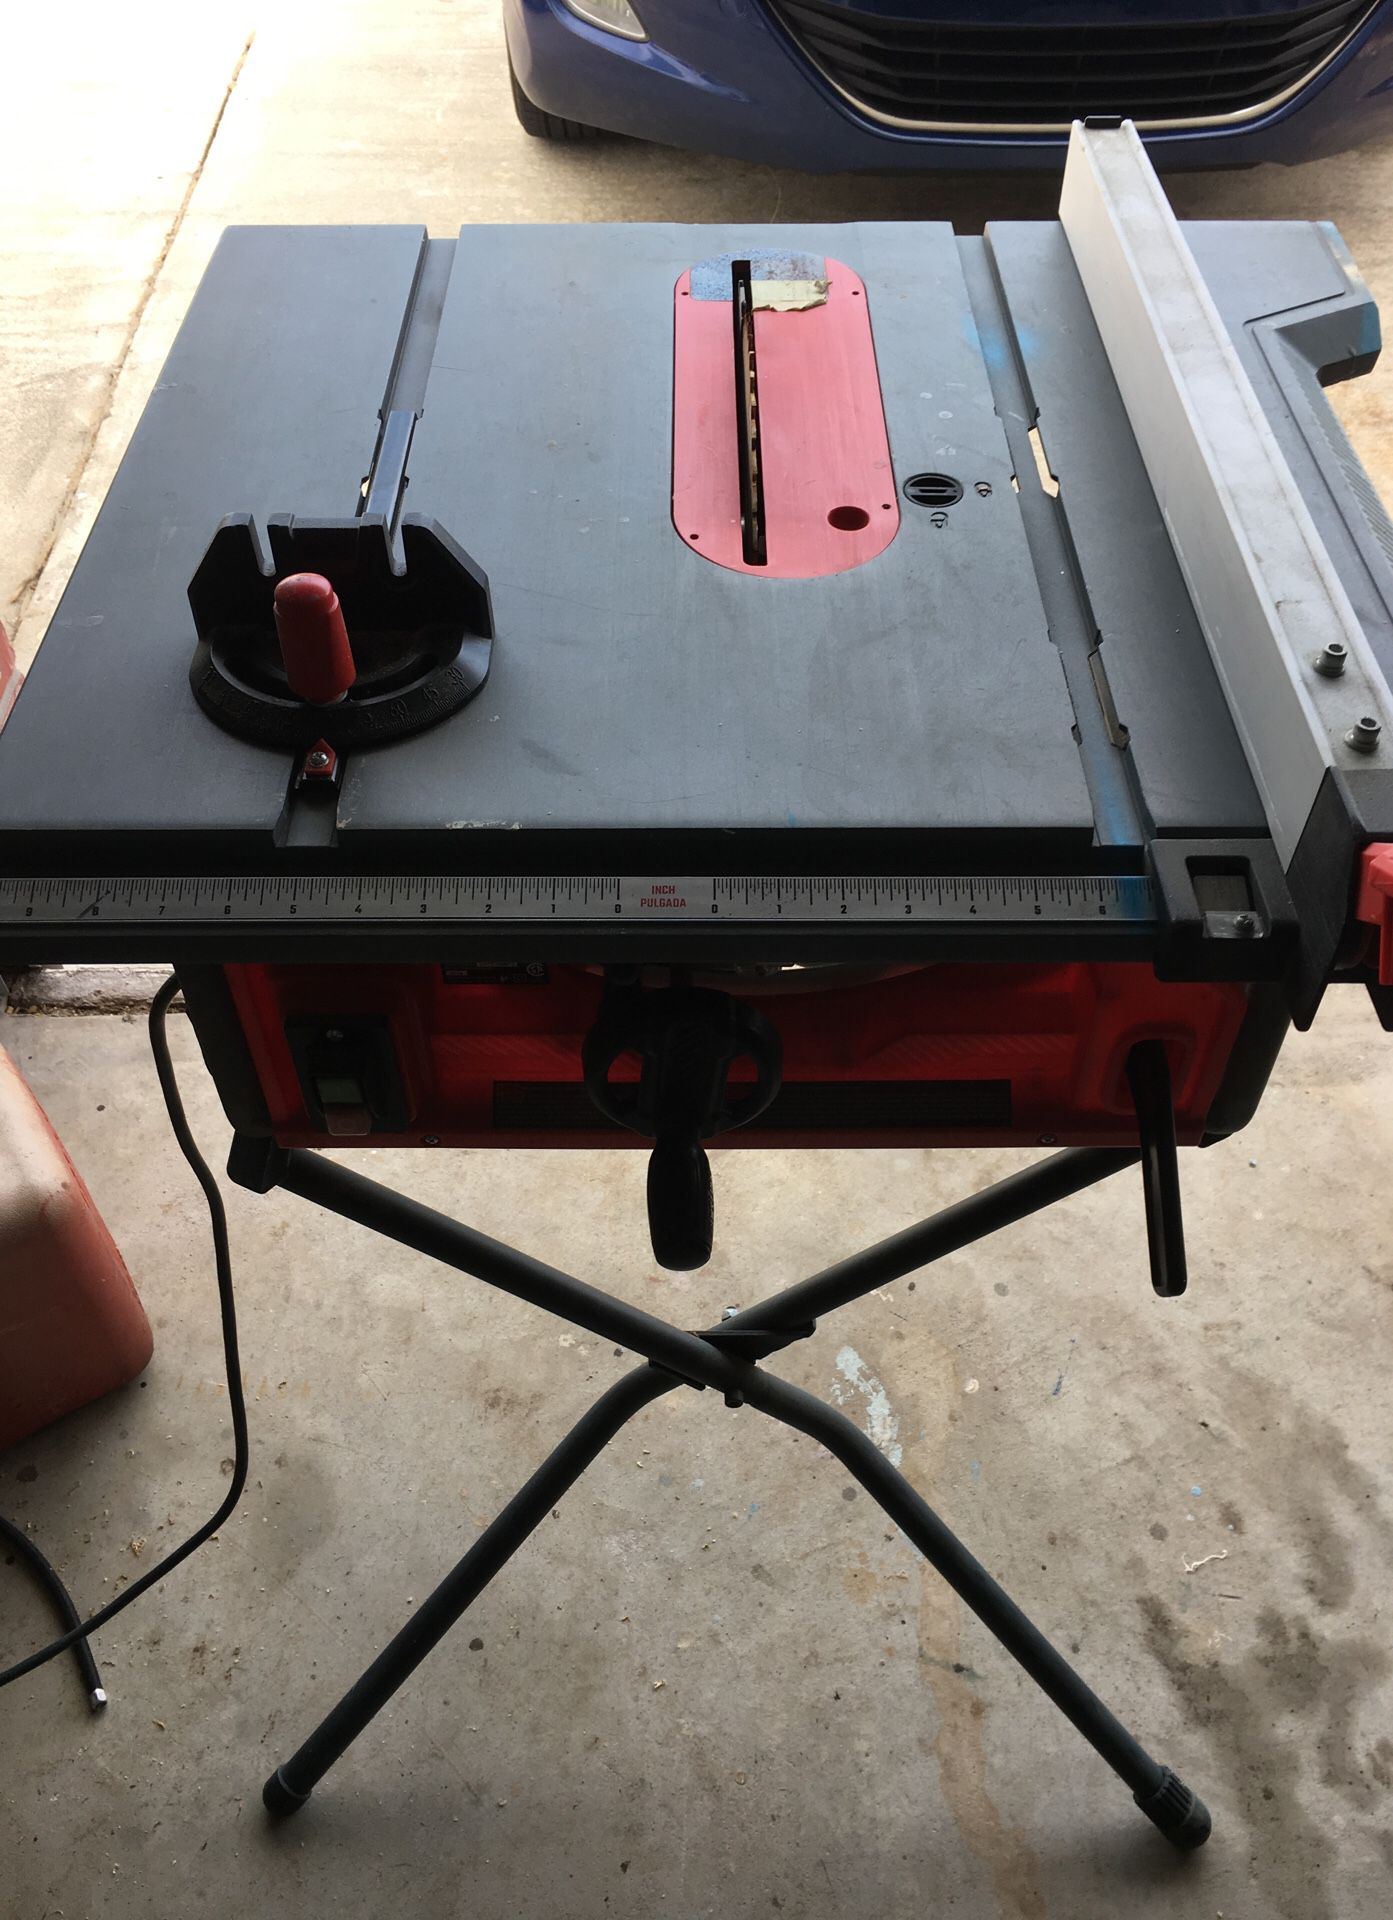 Craftsman 10 inch table saw with collapsible stand only $125